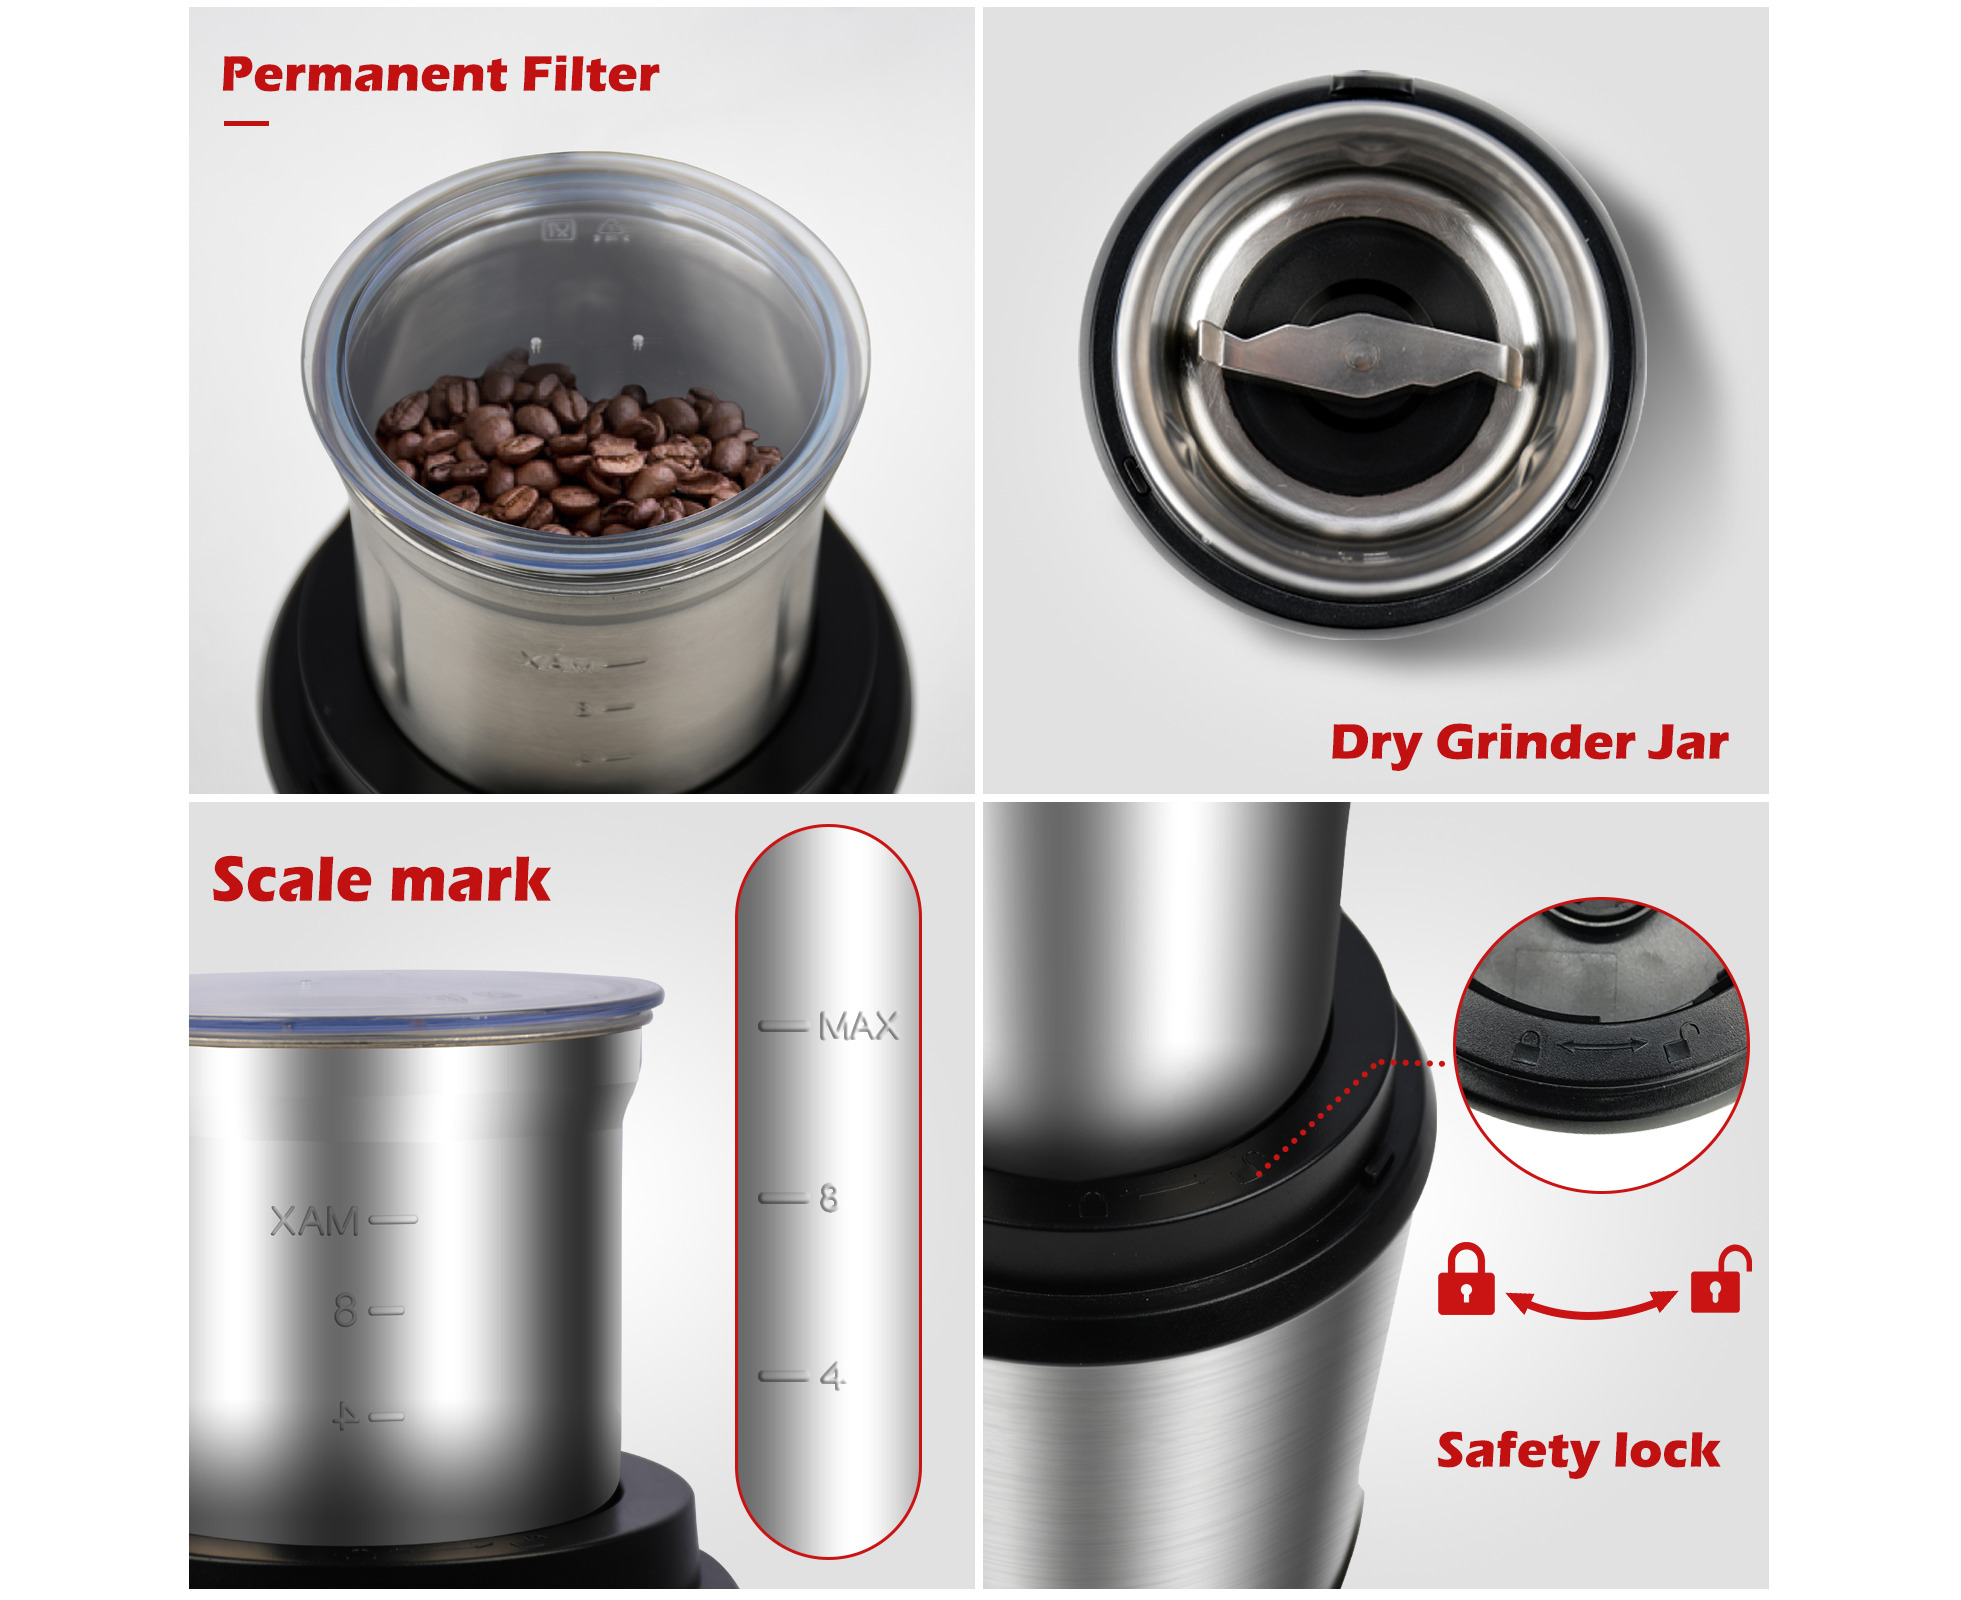 Showing the Breville the Coffee & Spice Coffee Grinder (BCG200) 